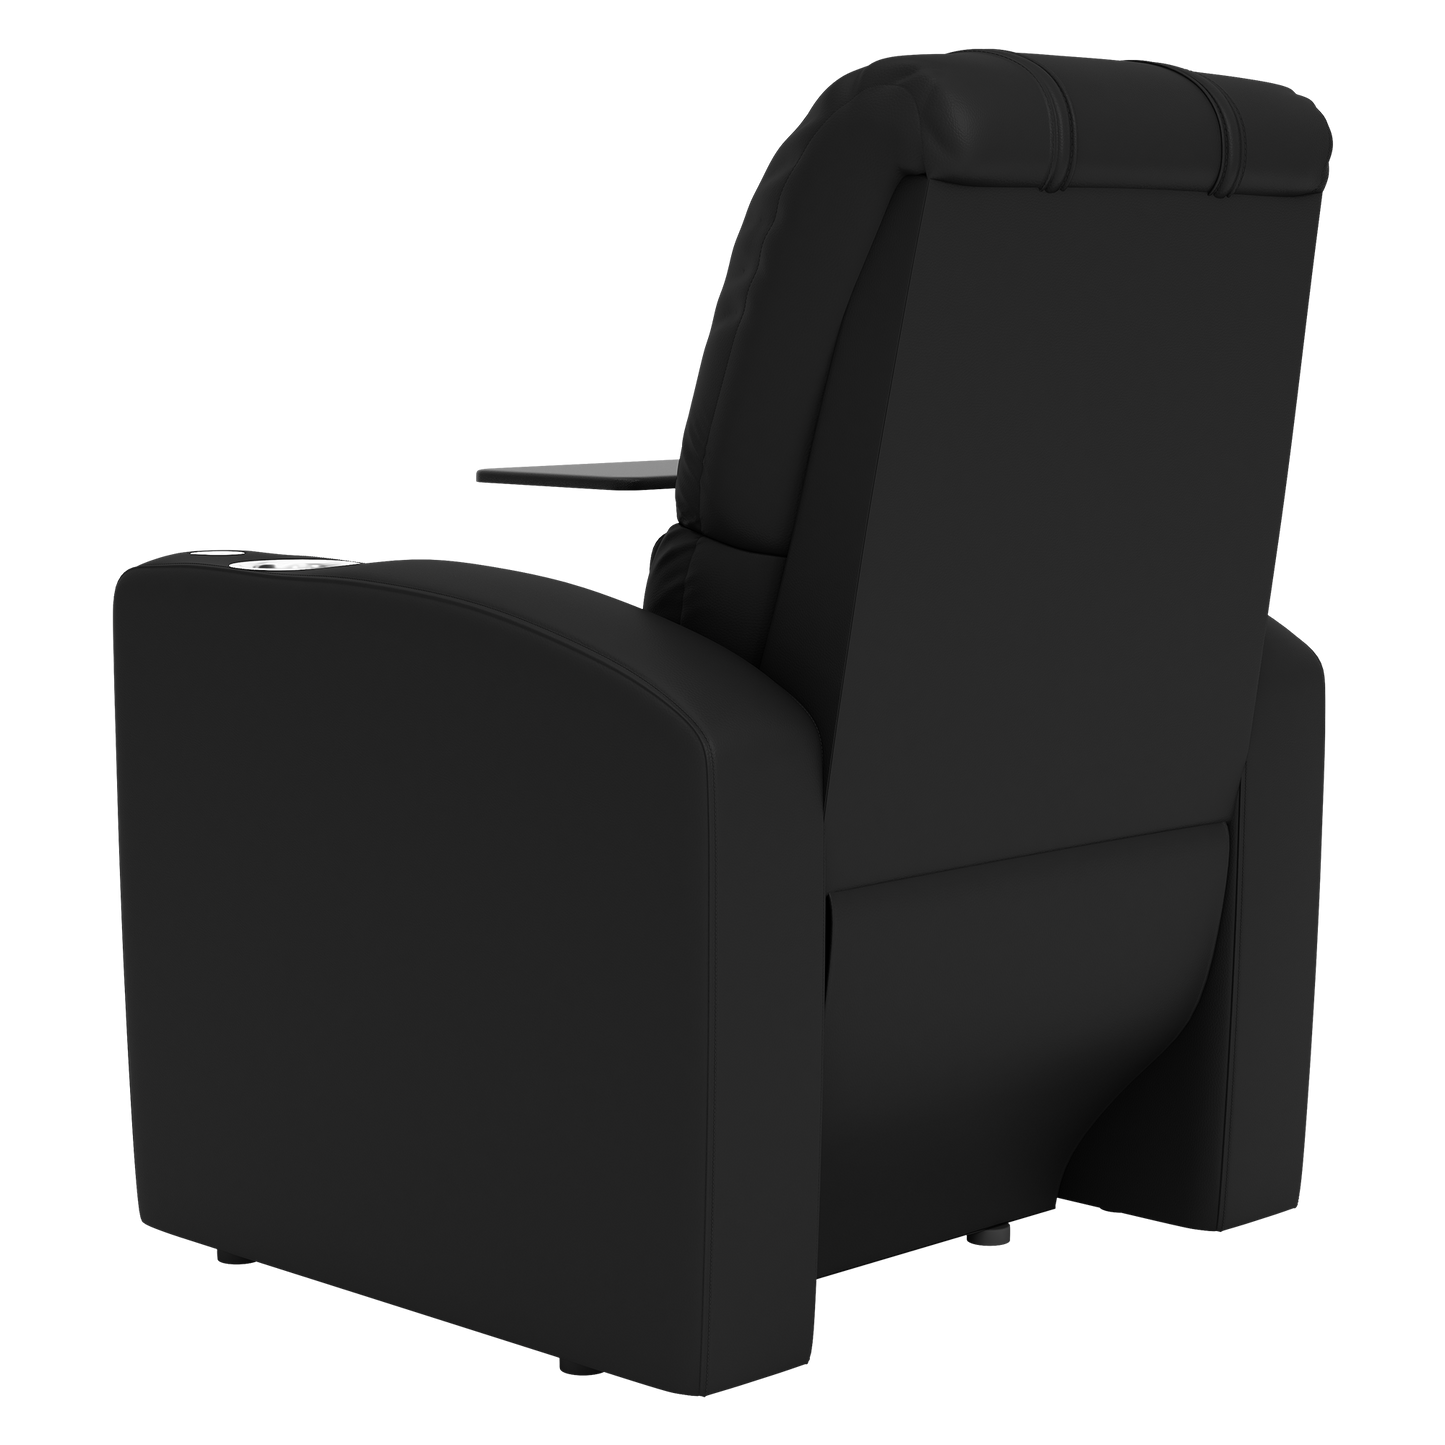 Stealth Power Plus Recliner with Shoulda Been Stars Icon Logo